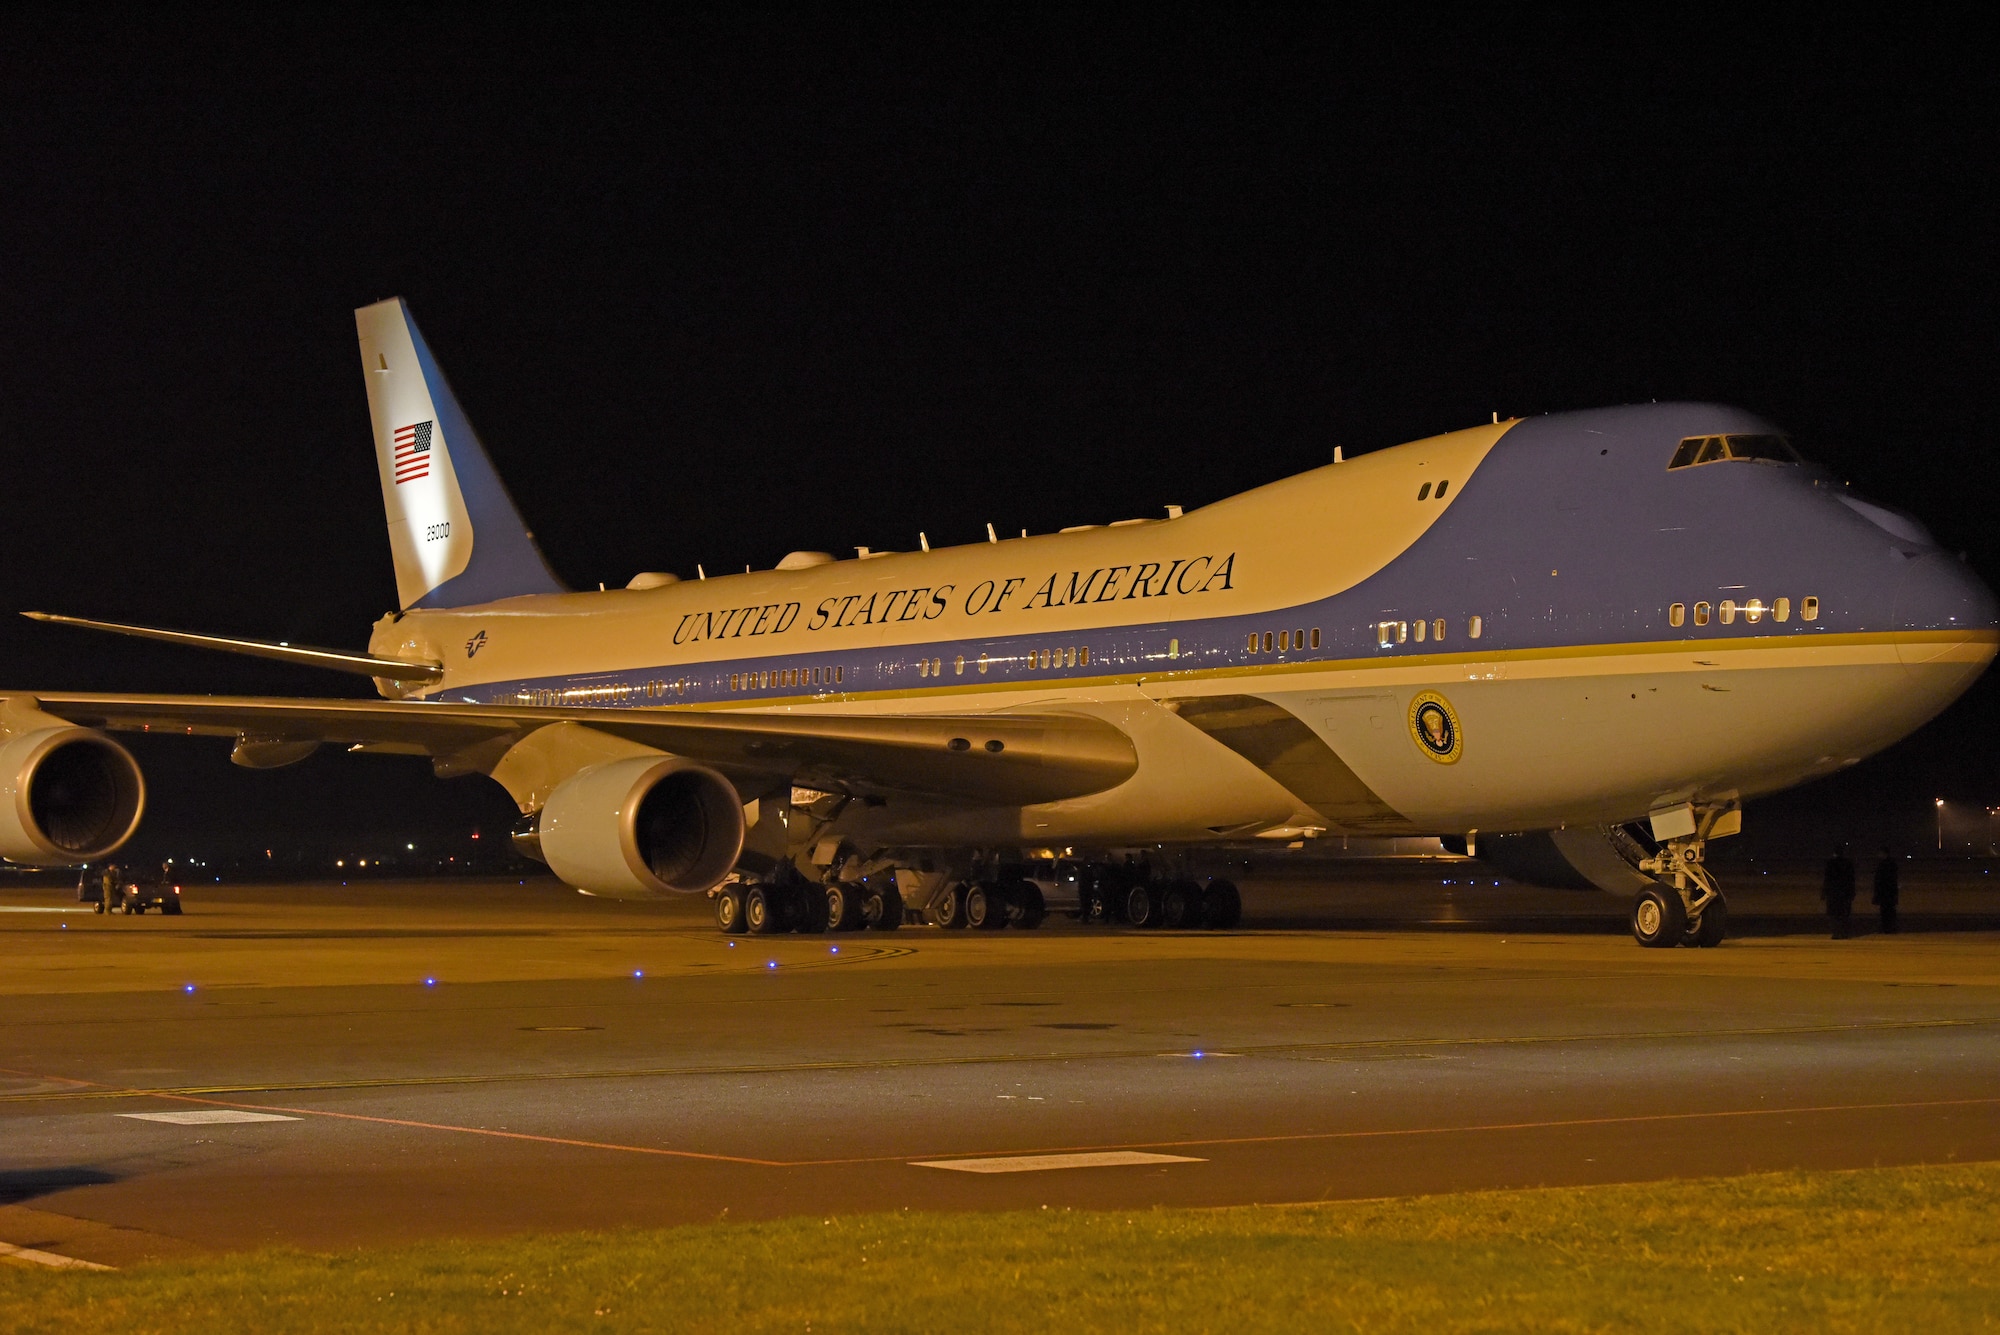 Air Force One prepares to depart from RAF Mildenhall, England, Feb. 26, 2019. Air Force One, carrying President Donald J. Trump and a contingency of White House officials and media members, received fuel and logistical support before continuing on the journey to Hanoi, the capital city of Vietnam, for the president’s second summit North Korean leader Kim-Jong Un. (U.S. Air Force photo by Airman 1st Class Brandon Esau)